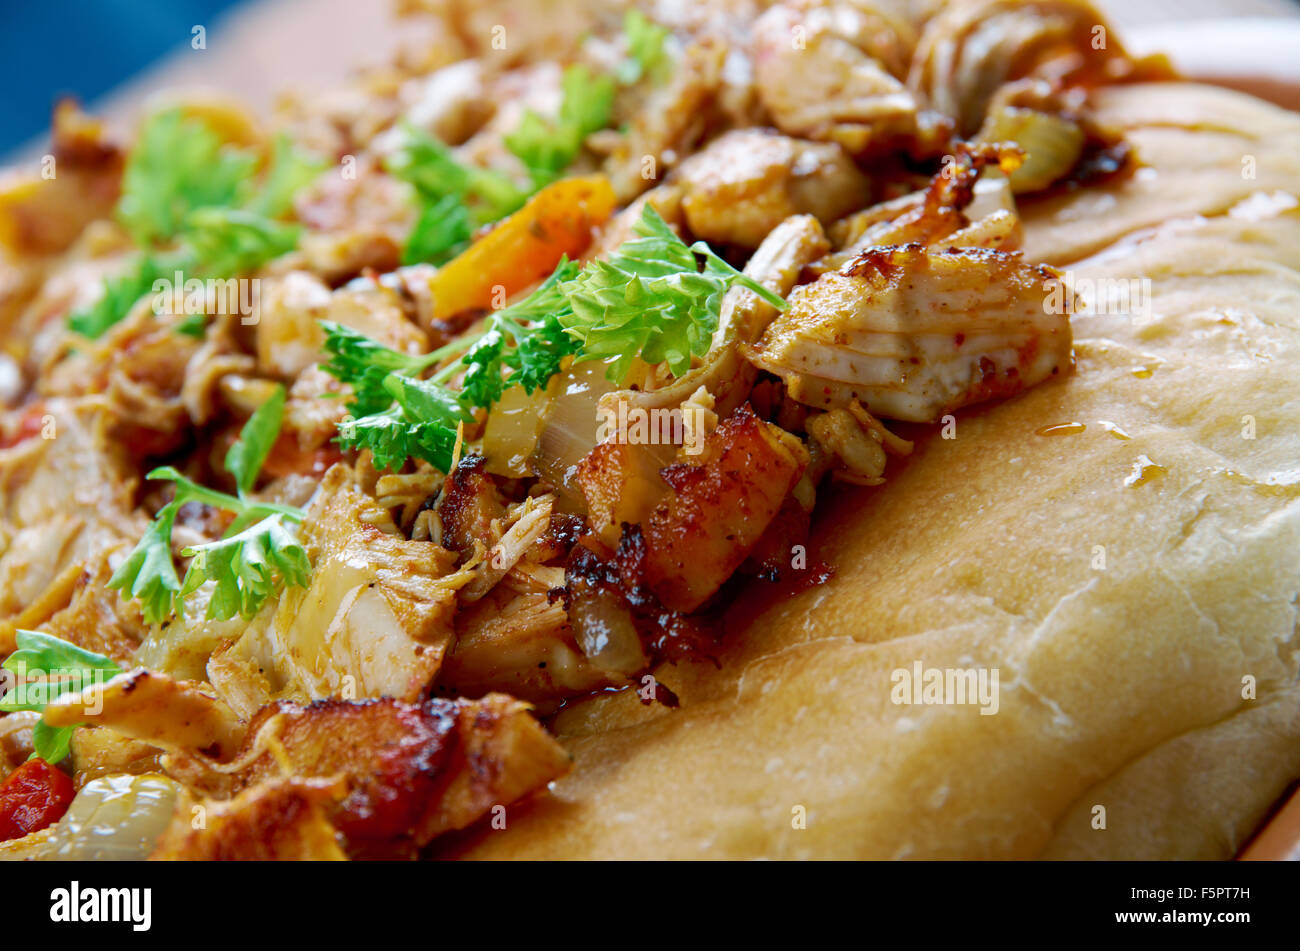 Musakhan -  Jordanian and Palestinian dish.roasted chicken baked with onions, sumac, allspice, saffron, served over taboon bread Stock Photo